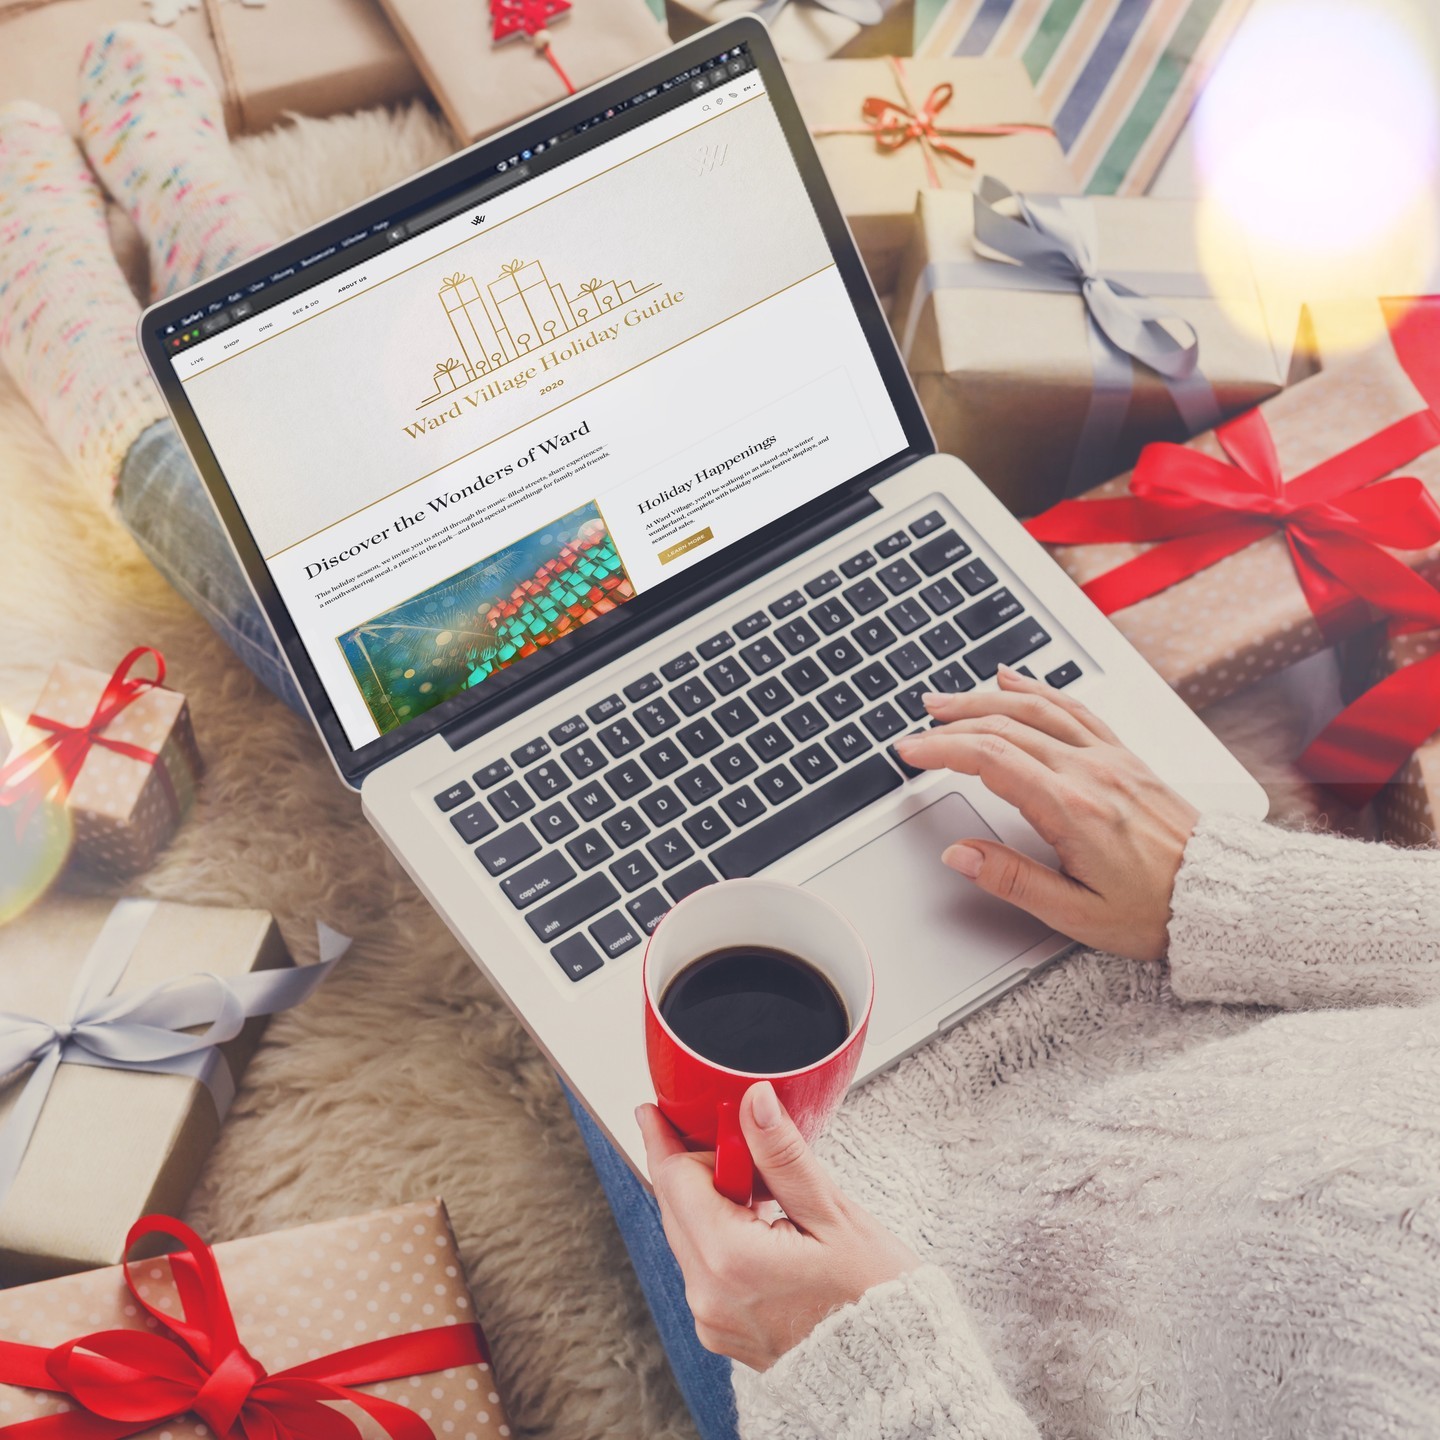 It’s here! Our 2021 Online Holiday Guide is live, and highlights the exciting festivities and special incentives happening throughout the season. Head to WardVillage.com/holiday-guide to find events and sales like our Gift of Experience program, as well as Black Friday, Small Business Saturday, Cyber Monday specials and more.